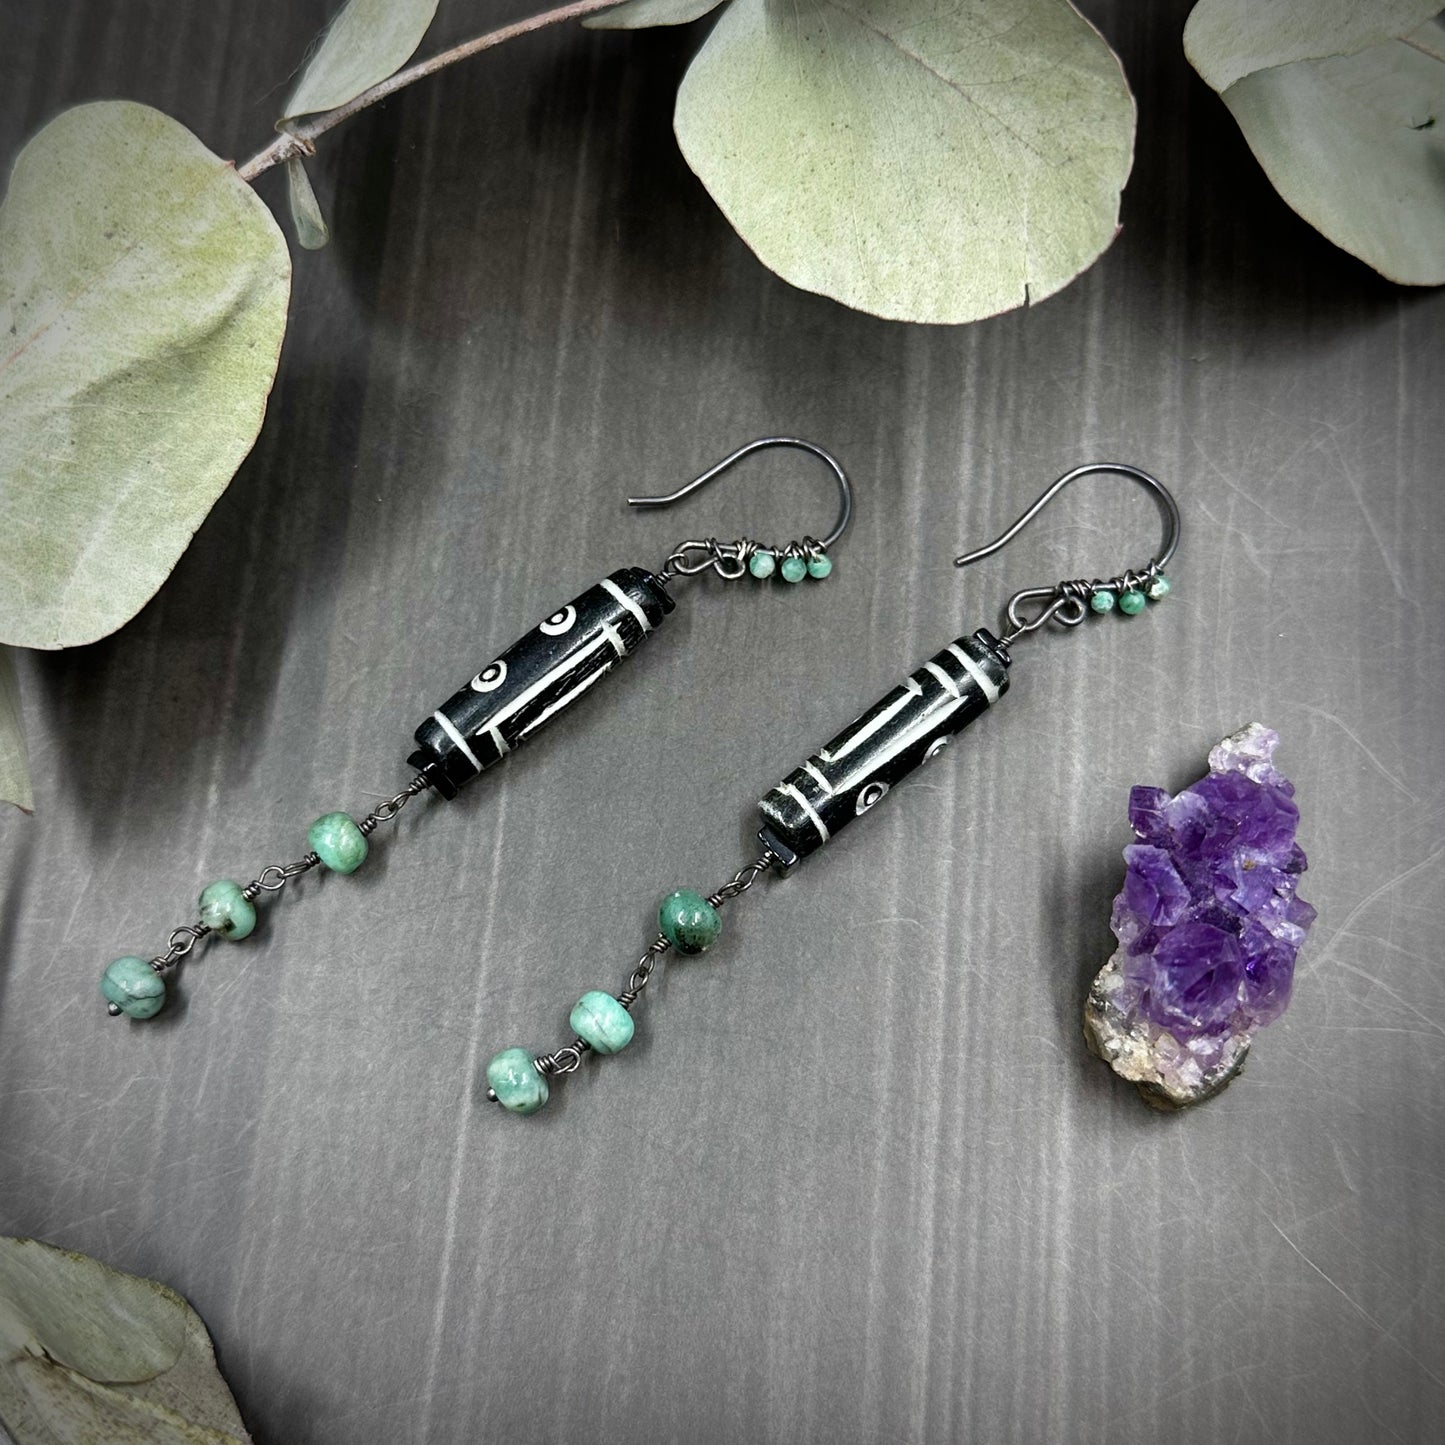 Carved Bone Earrings with Black Spinel and Emeralds